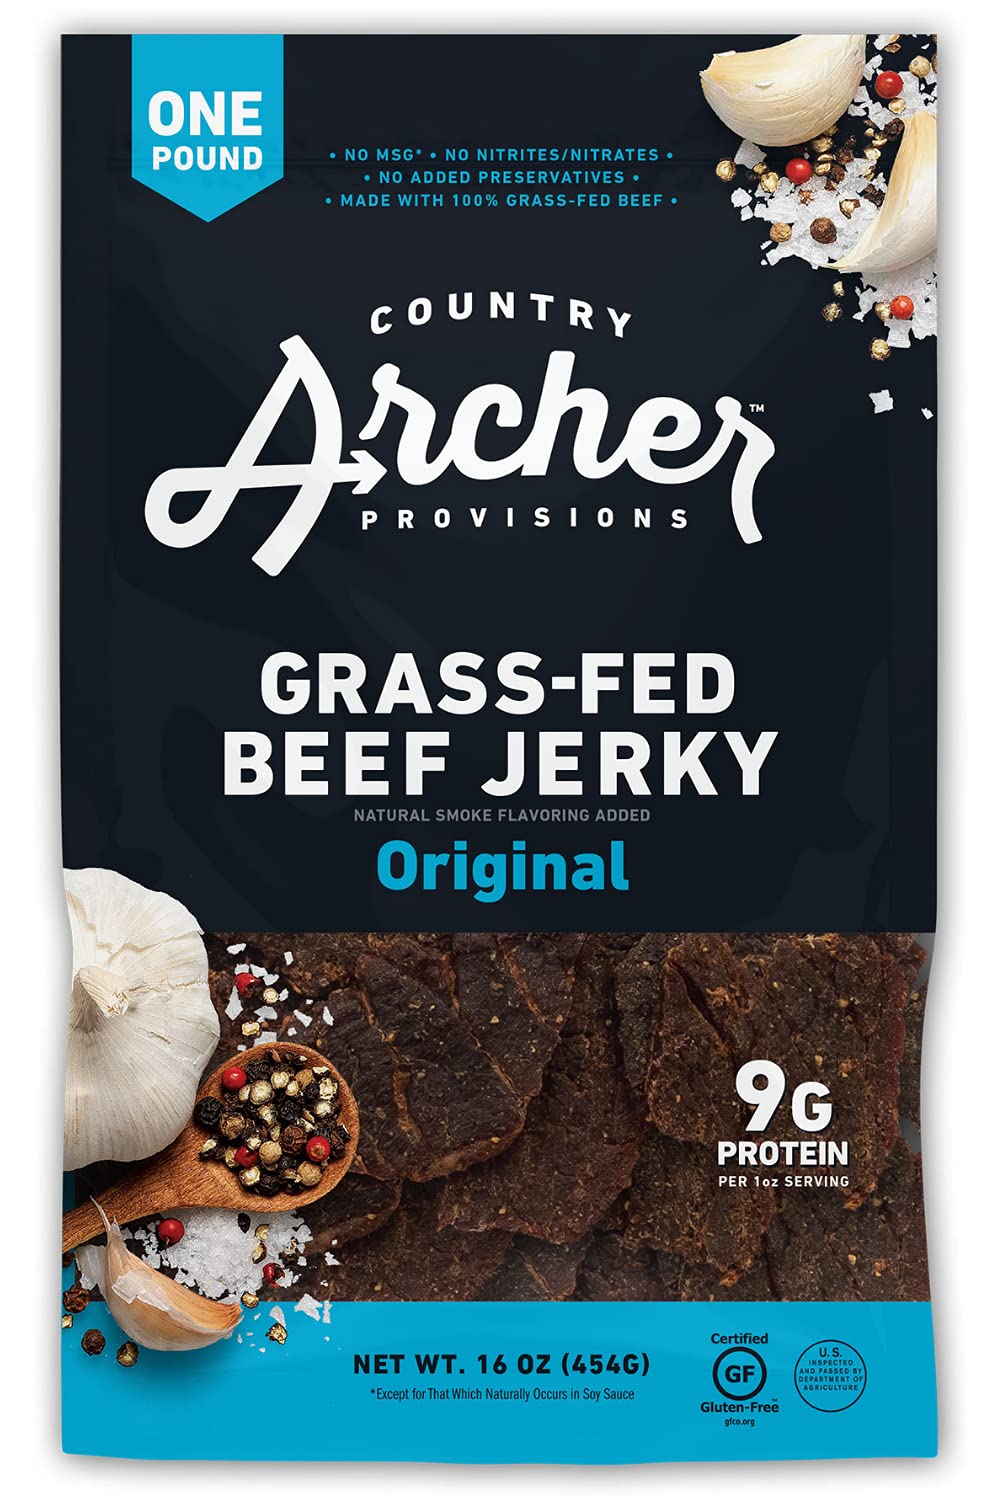 Original Beef Jerky by Country Archer 8% Grass-Fed Gluten Free